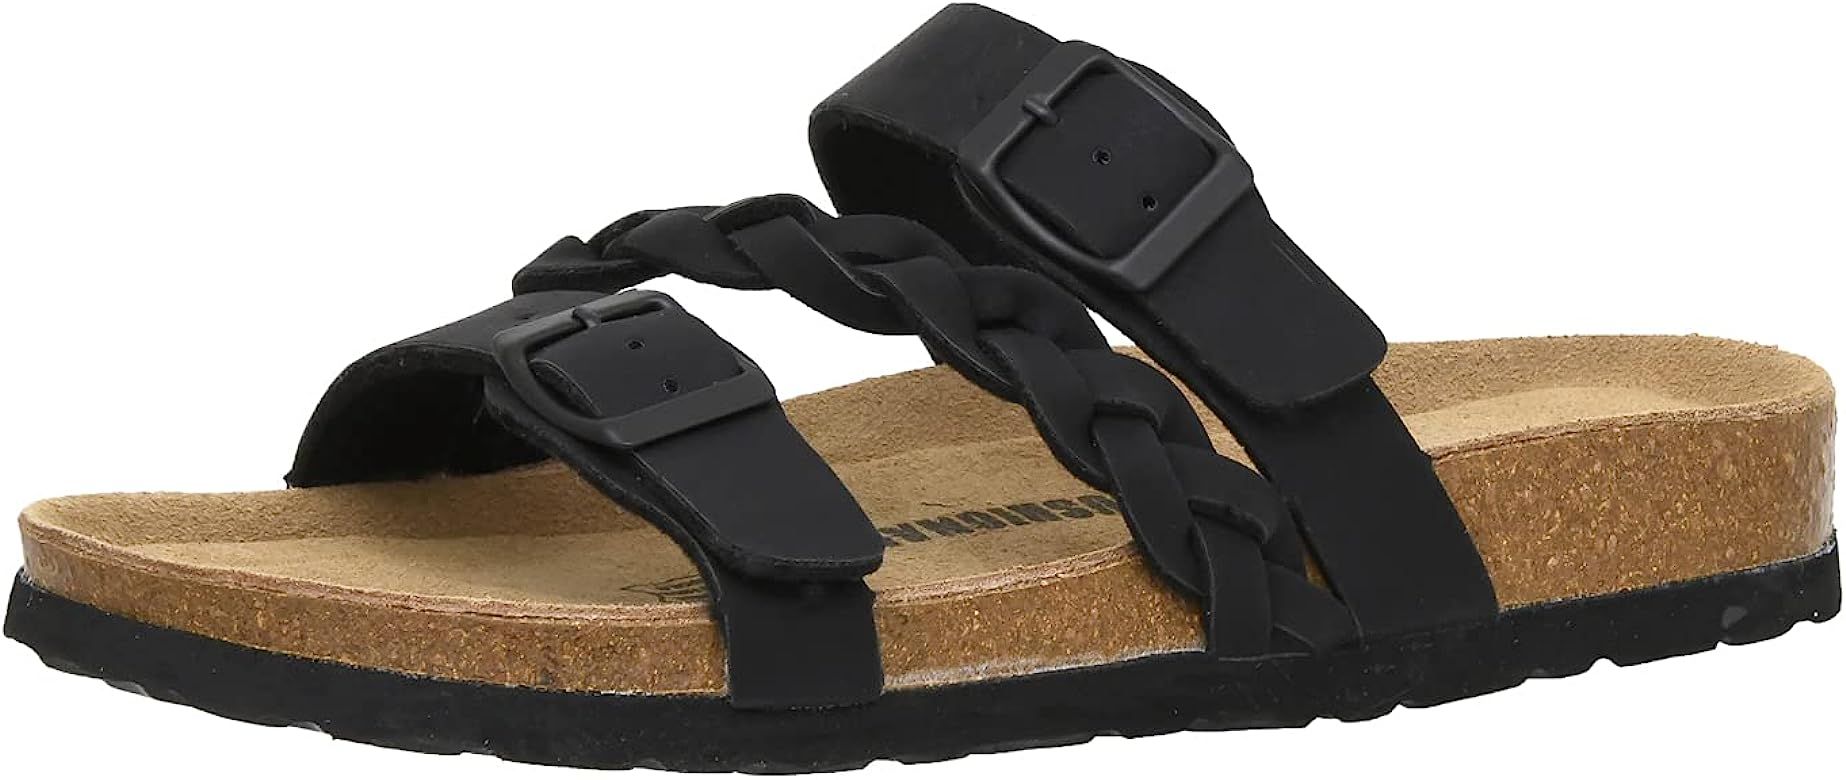 CUSHIONAIRE Women's Lizzy Cork footbed Sandal with +Comfort and Wide Widths Available | Amazon (US)